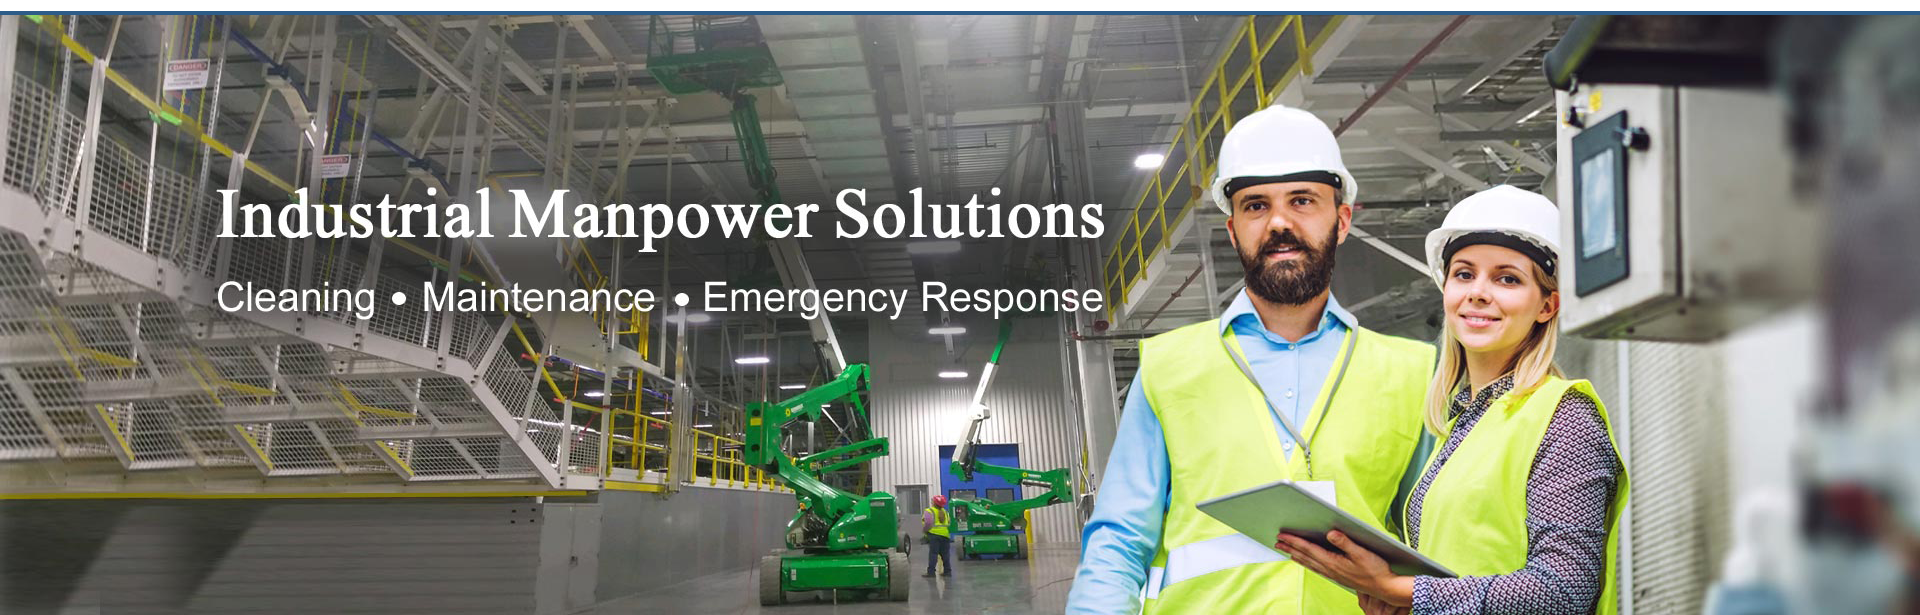 Industrial Manpower Solutions